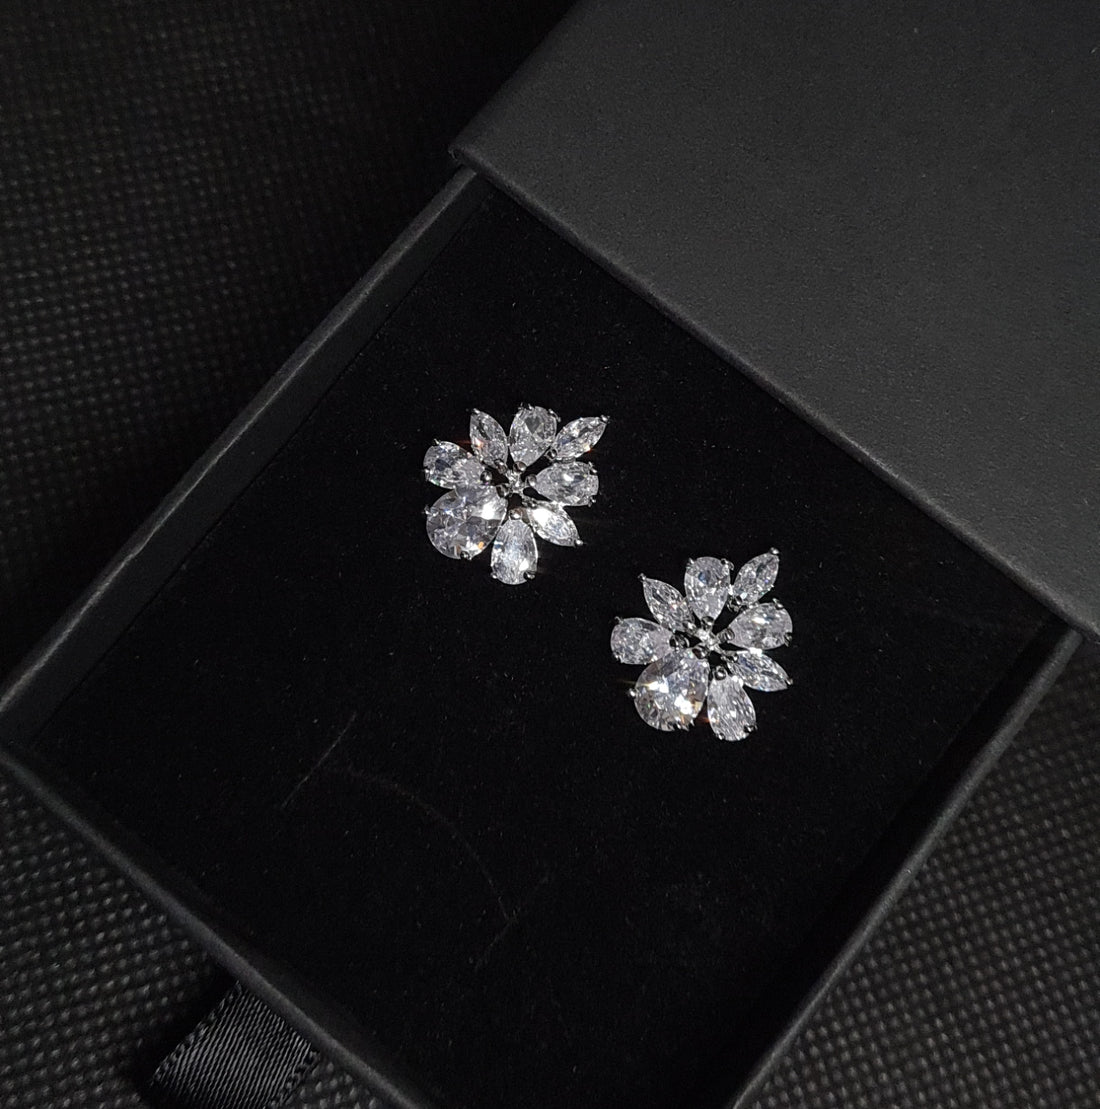 A pair of silver earrings with white diamonds. The earrings are simple in design and the diamonds are sparkling. These elegant earrings would be perfect for a special occasion and would make a great gift.